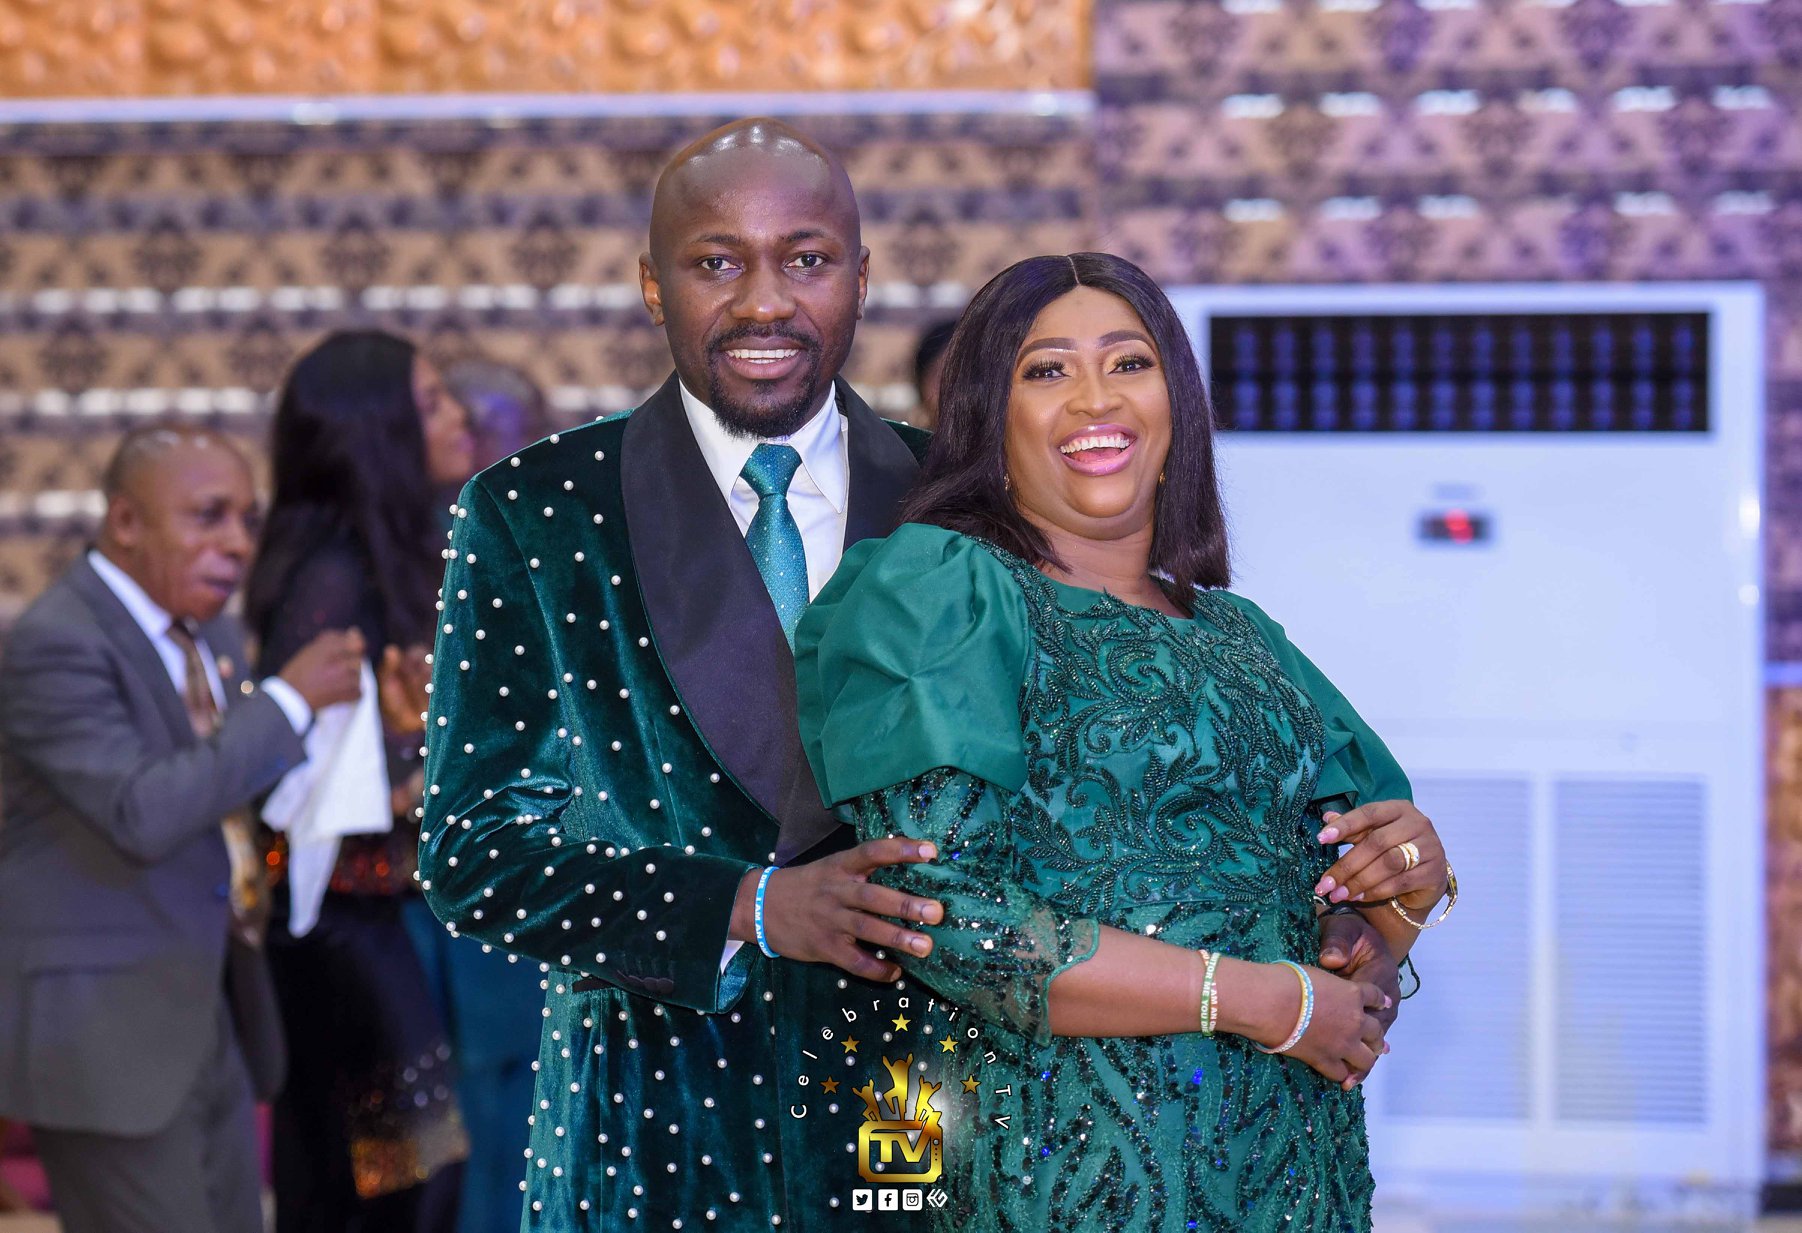 Apostle Suleman avoids criticism and shares beloved photos with his wife